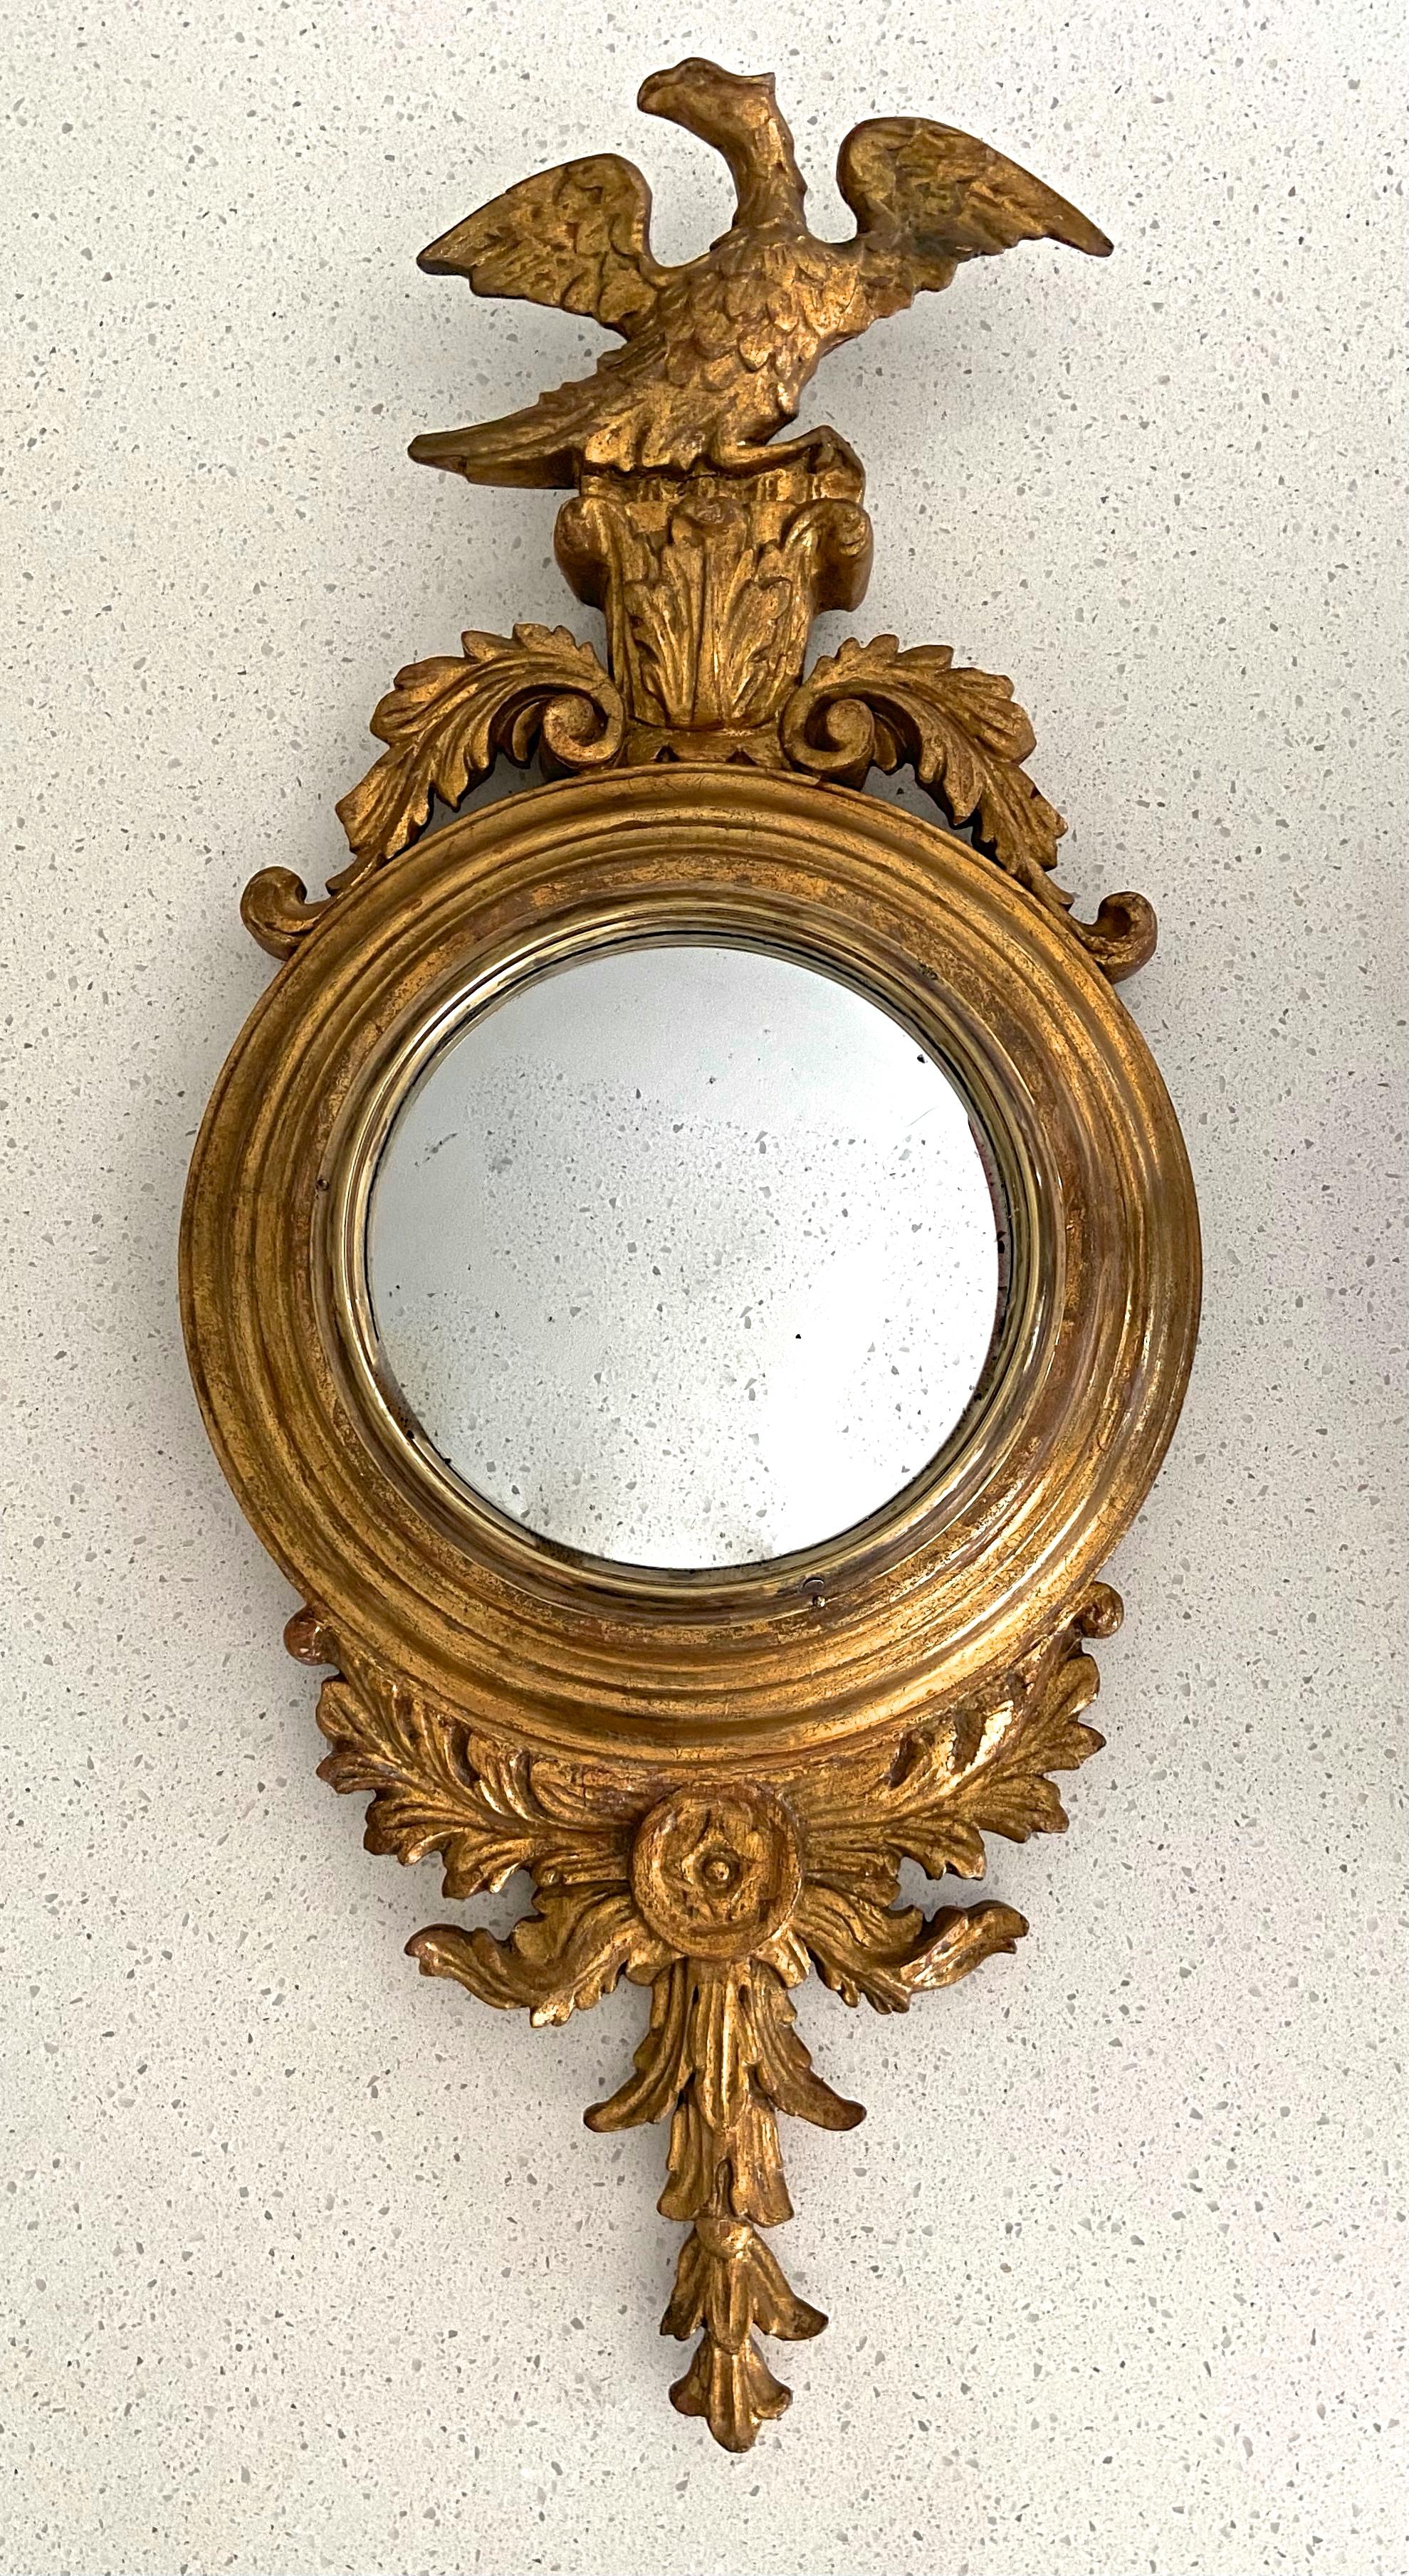 Expertly carved gilt wood Federal style eagle acanthus leaf motif convex wall mirror. Overall sizer 28.5